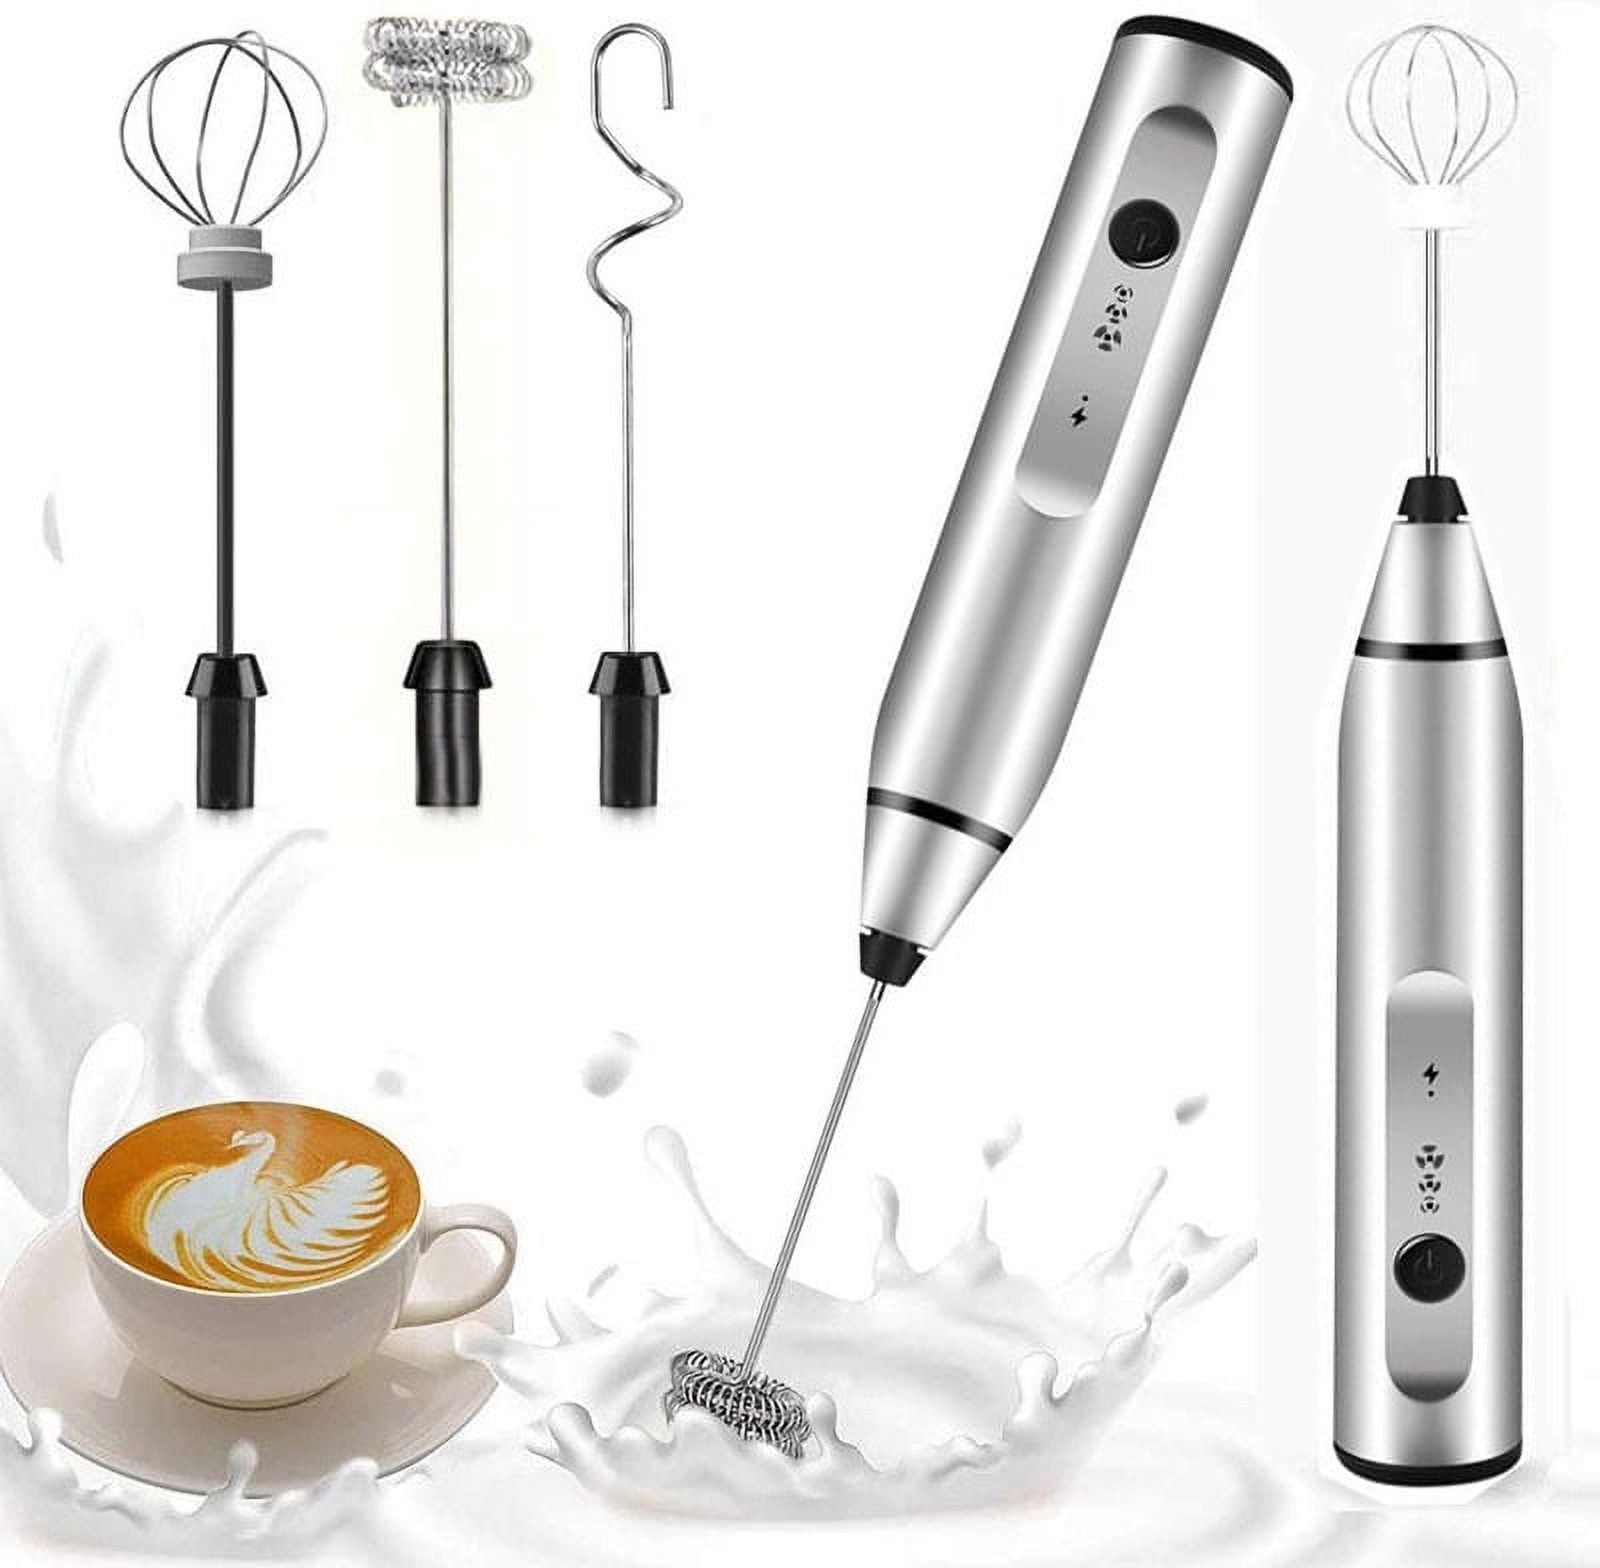  BLOOPIC Rechargeable Milk Frother Electric Mixer whisk